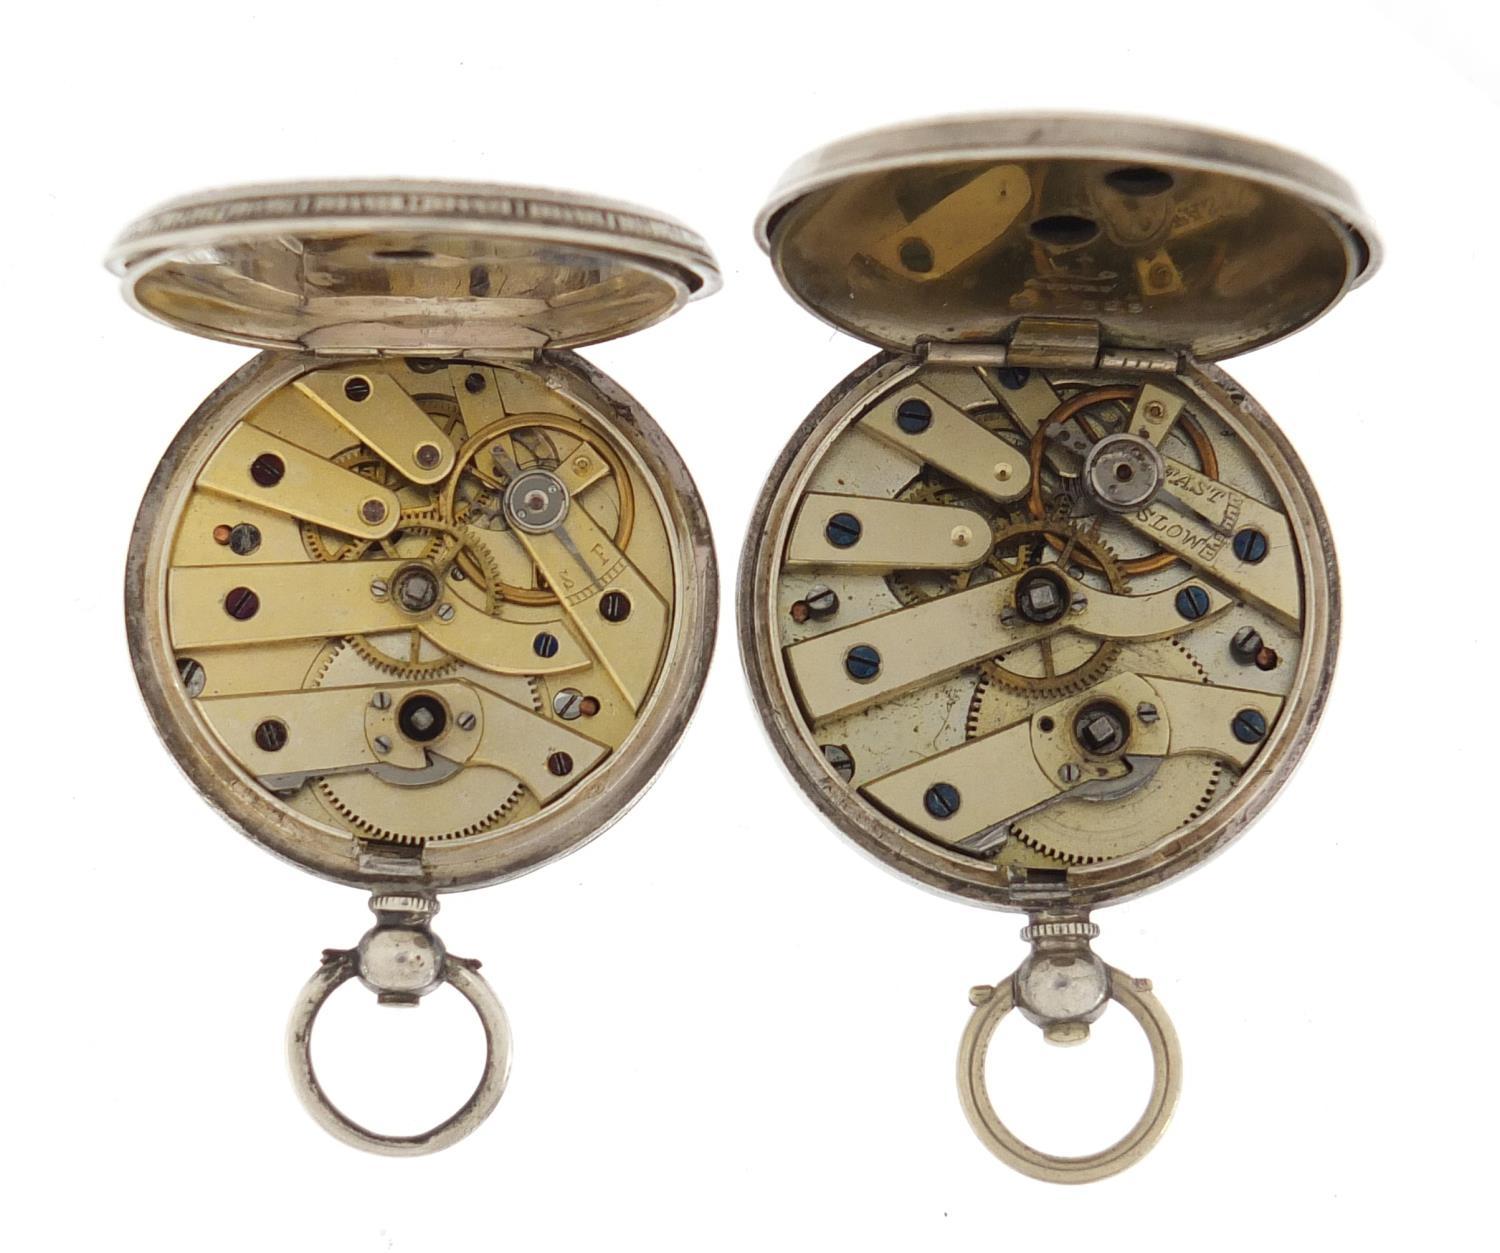 Two ladies silver open face pocket watches with ornate enamelled dials, each 35mm in diameter - Image 3 of 3